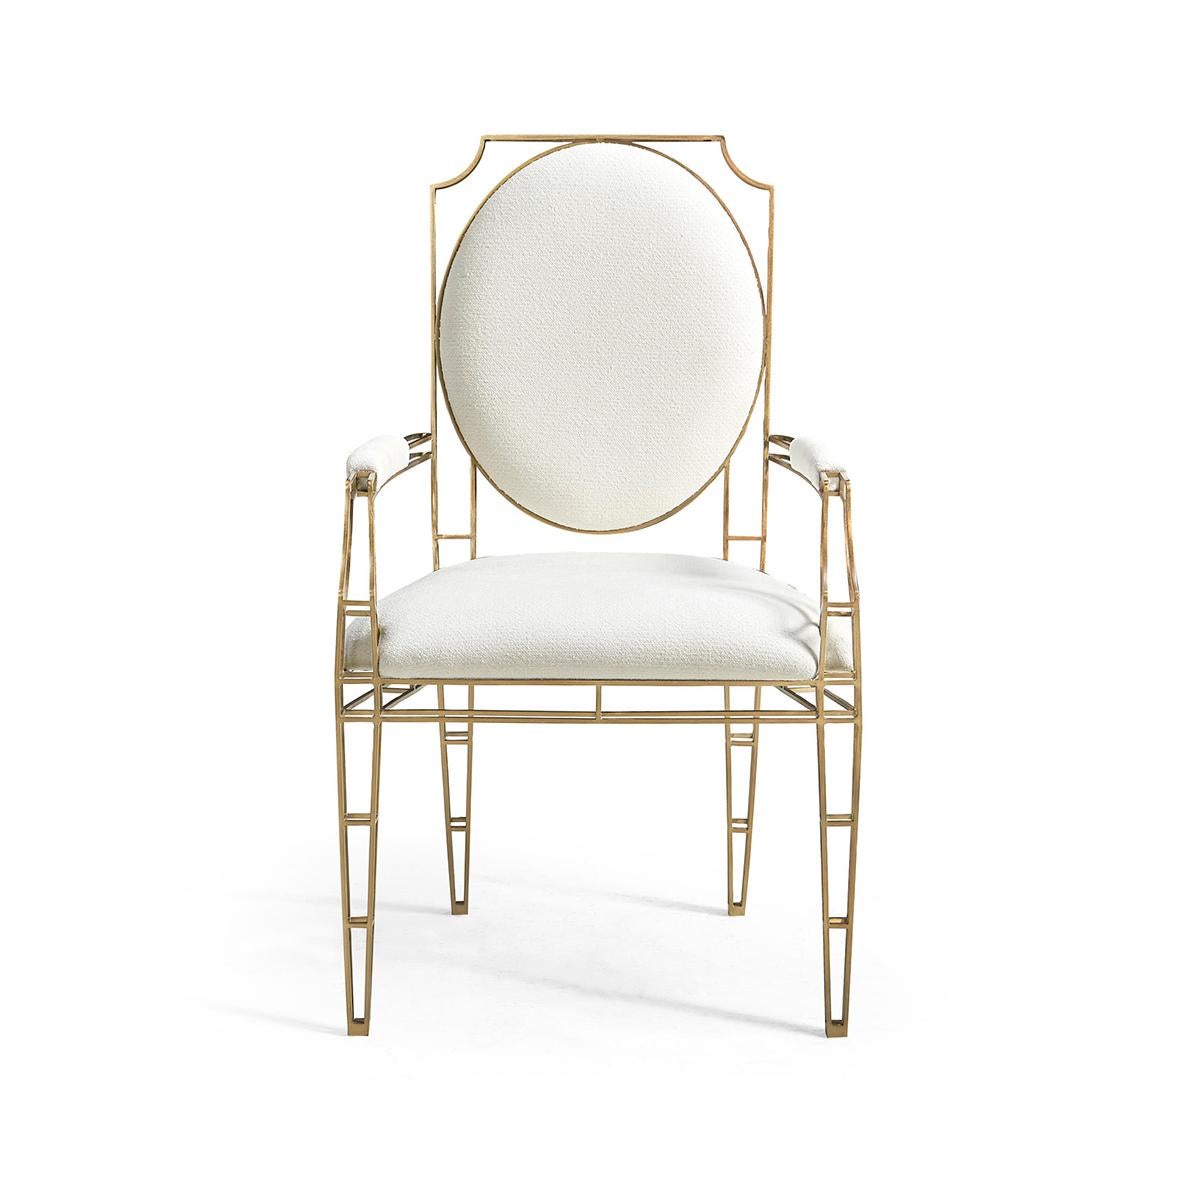 Designed to enhance any room with its elegant presence, this chair perfectly balances artistic form with functional style.

Crafted with precision from stainless steel, ensuring durability and a gleaming appearance. The exoskeleton frame of the